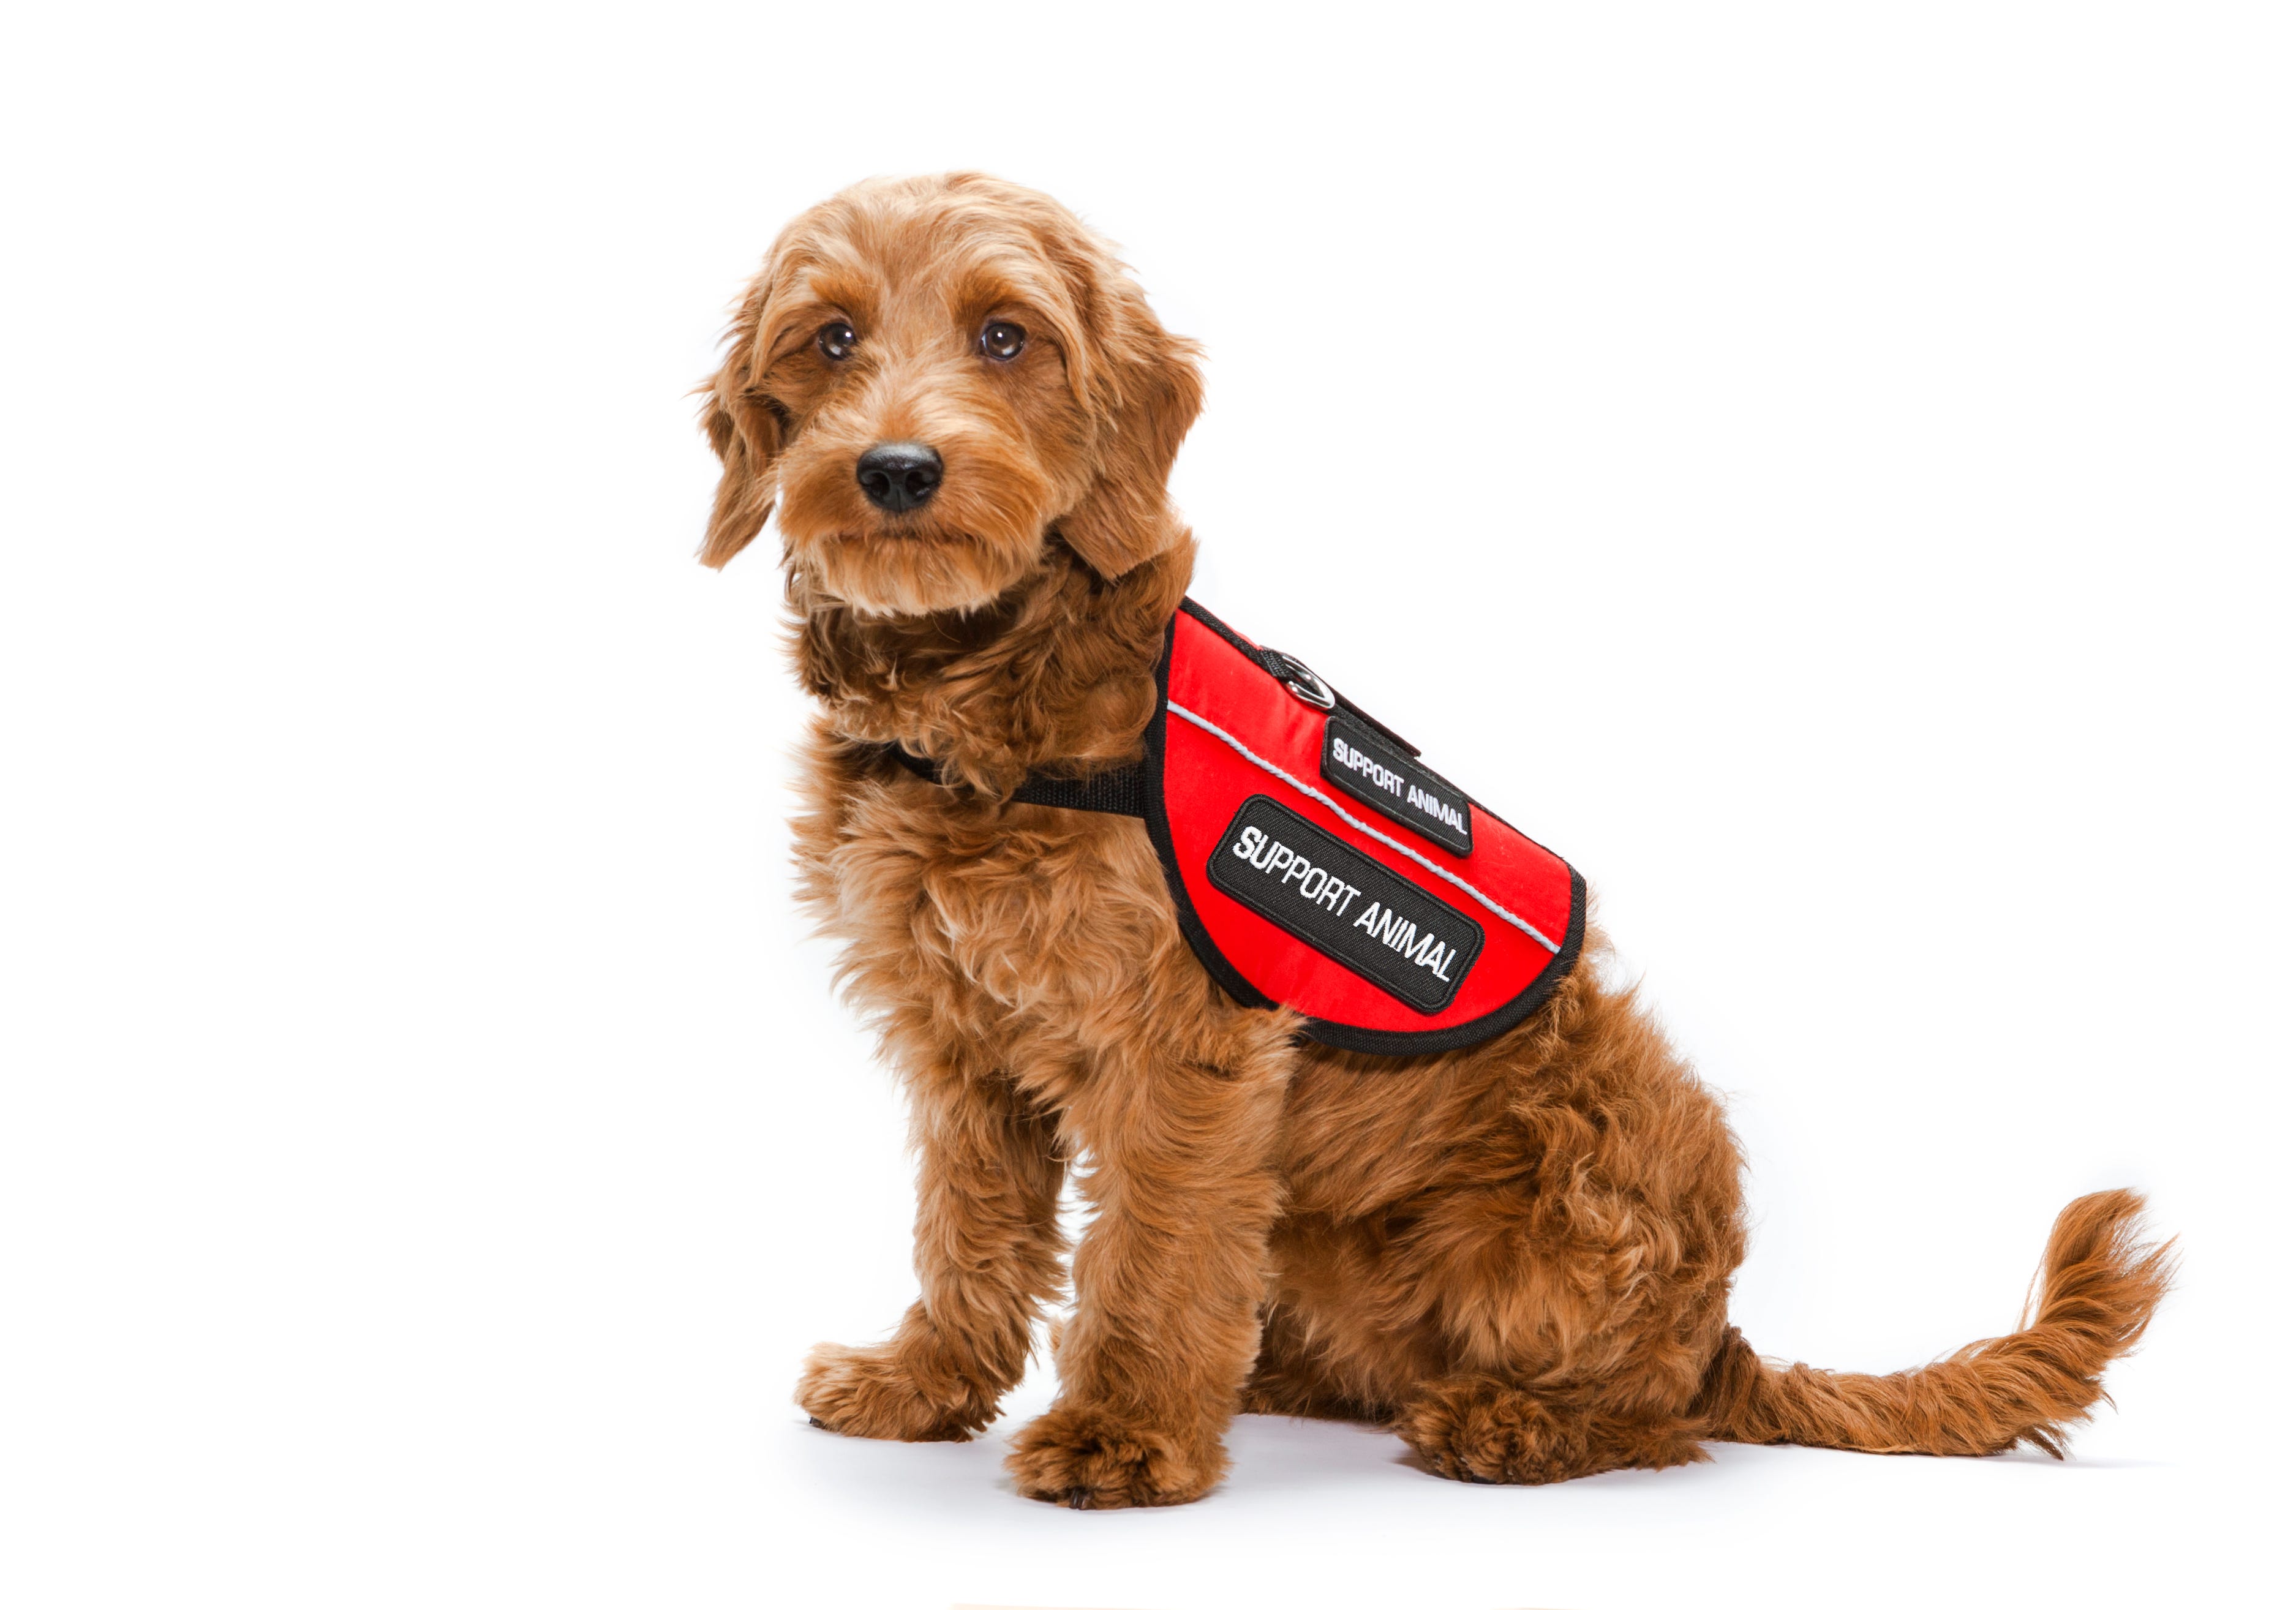 does the acaa allow breed bans for service dogs